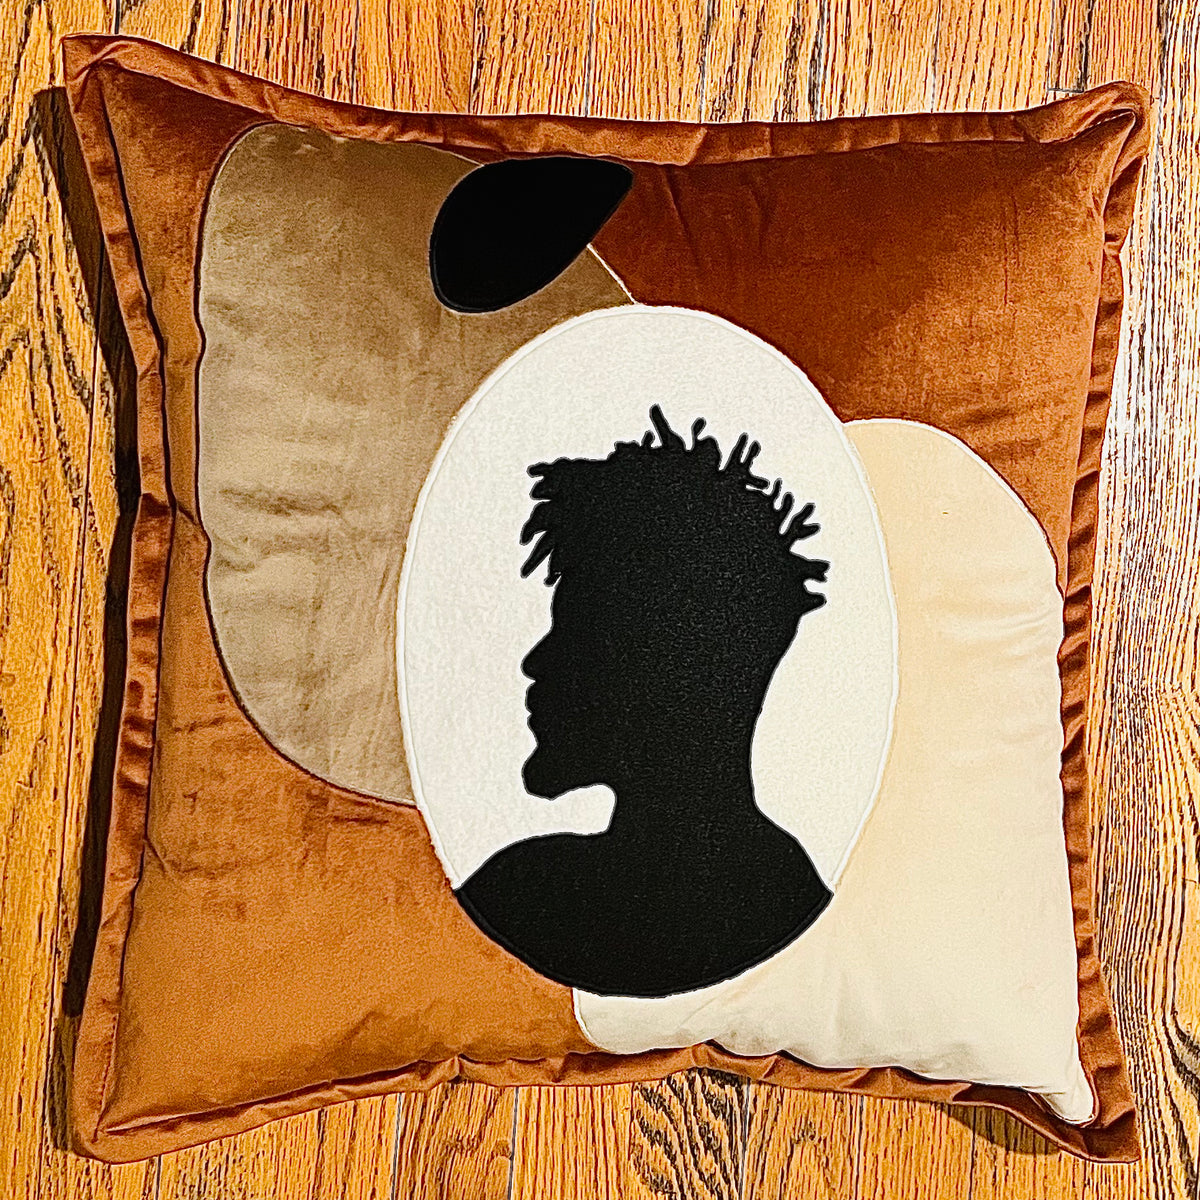 Afro Cameo 20” Square Throw Pillow